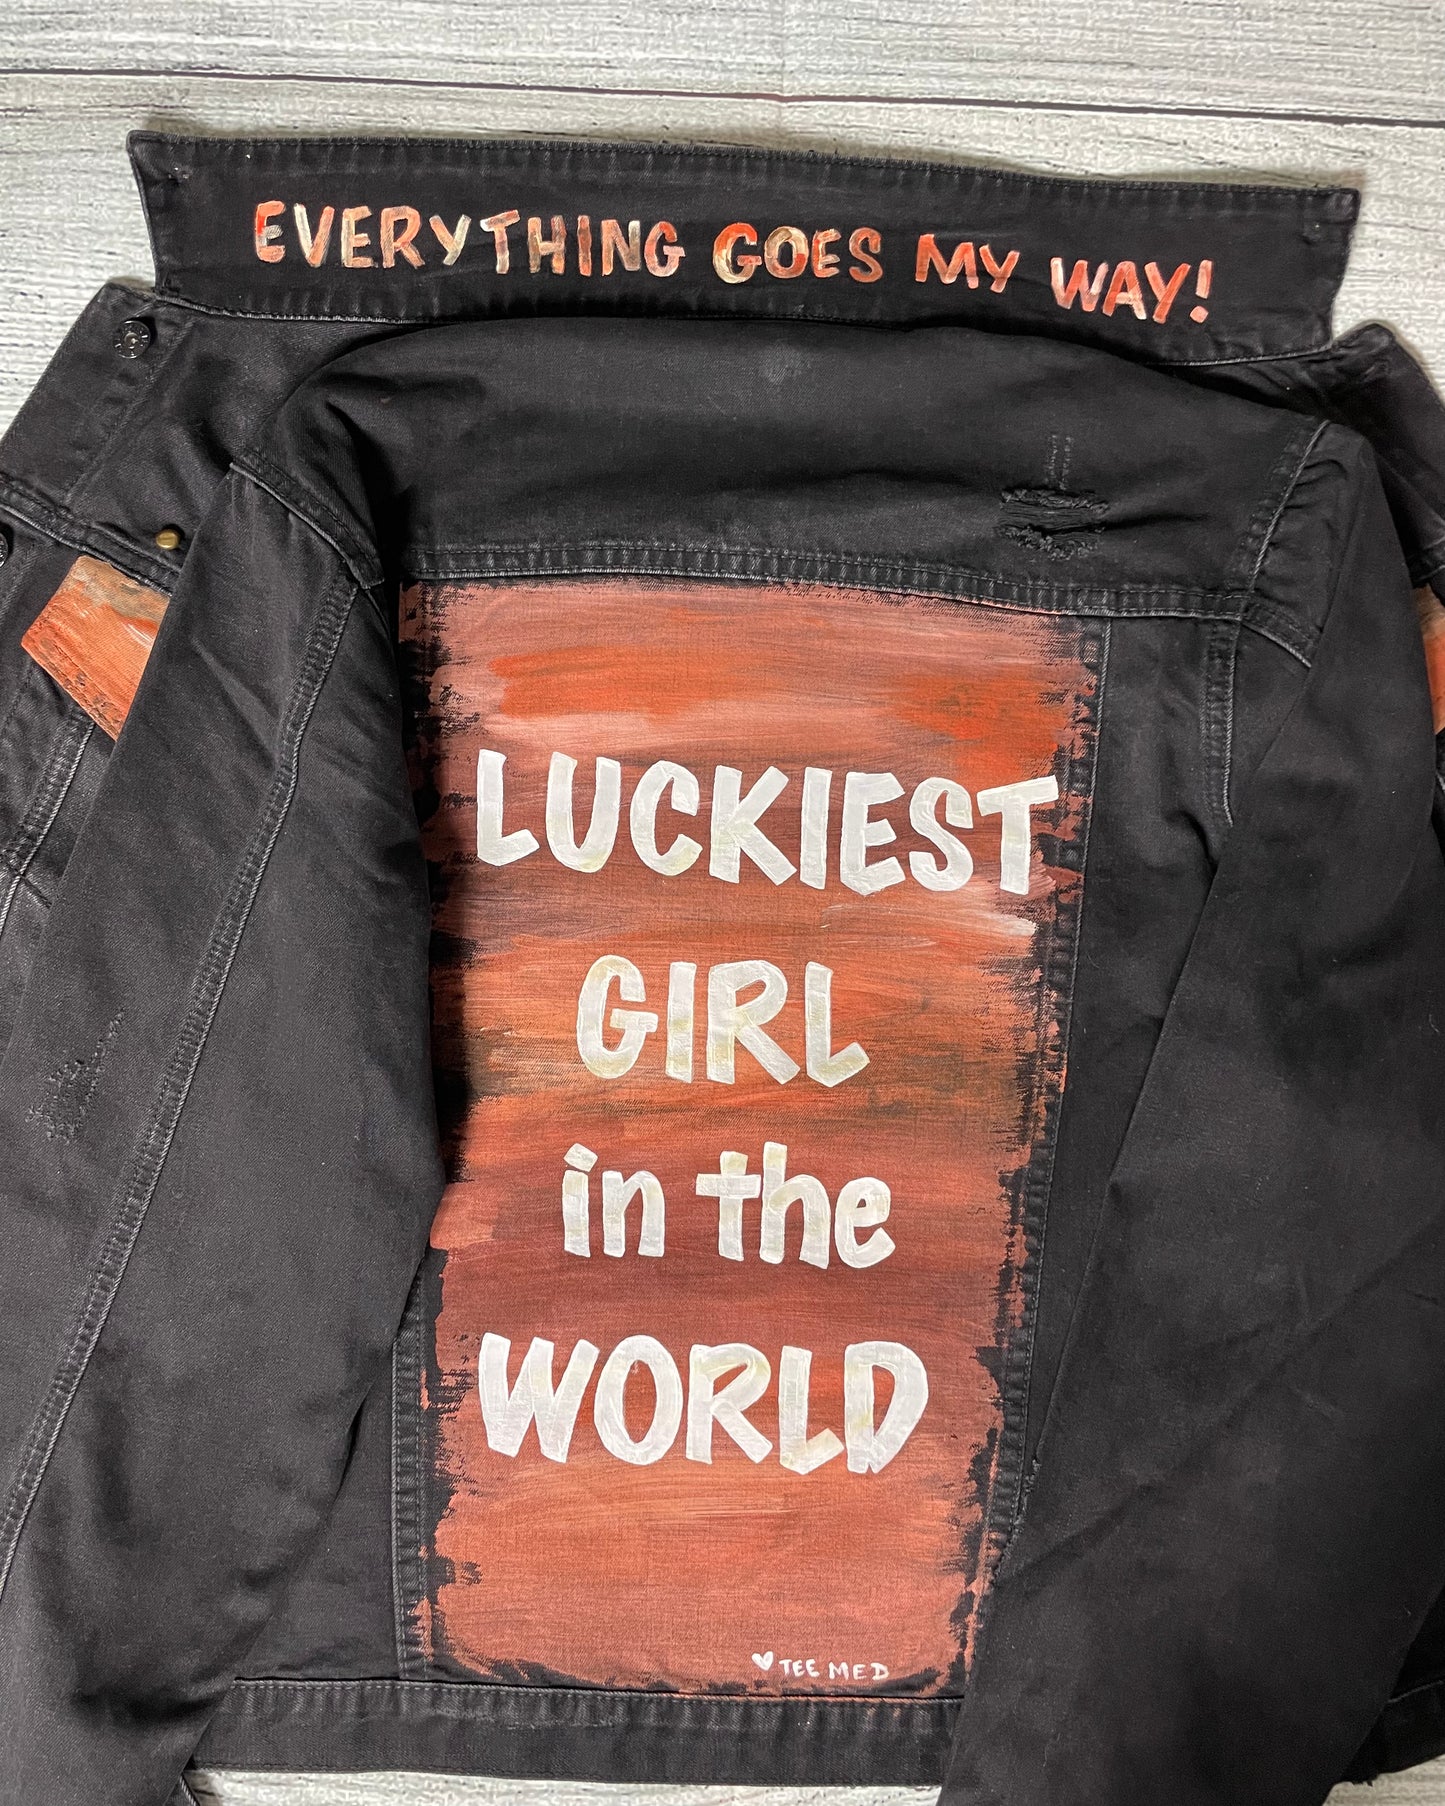 LUCKIEST GIRL -  Everything goes my way!